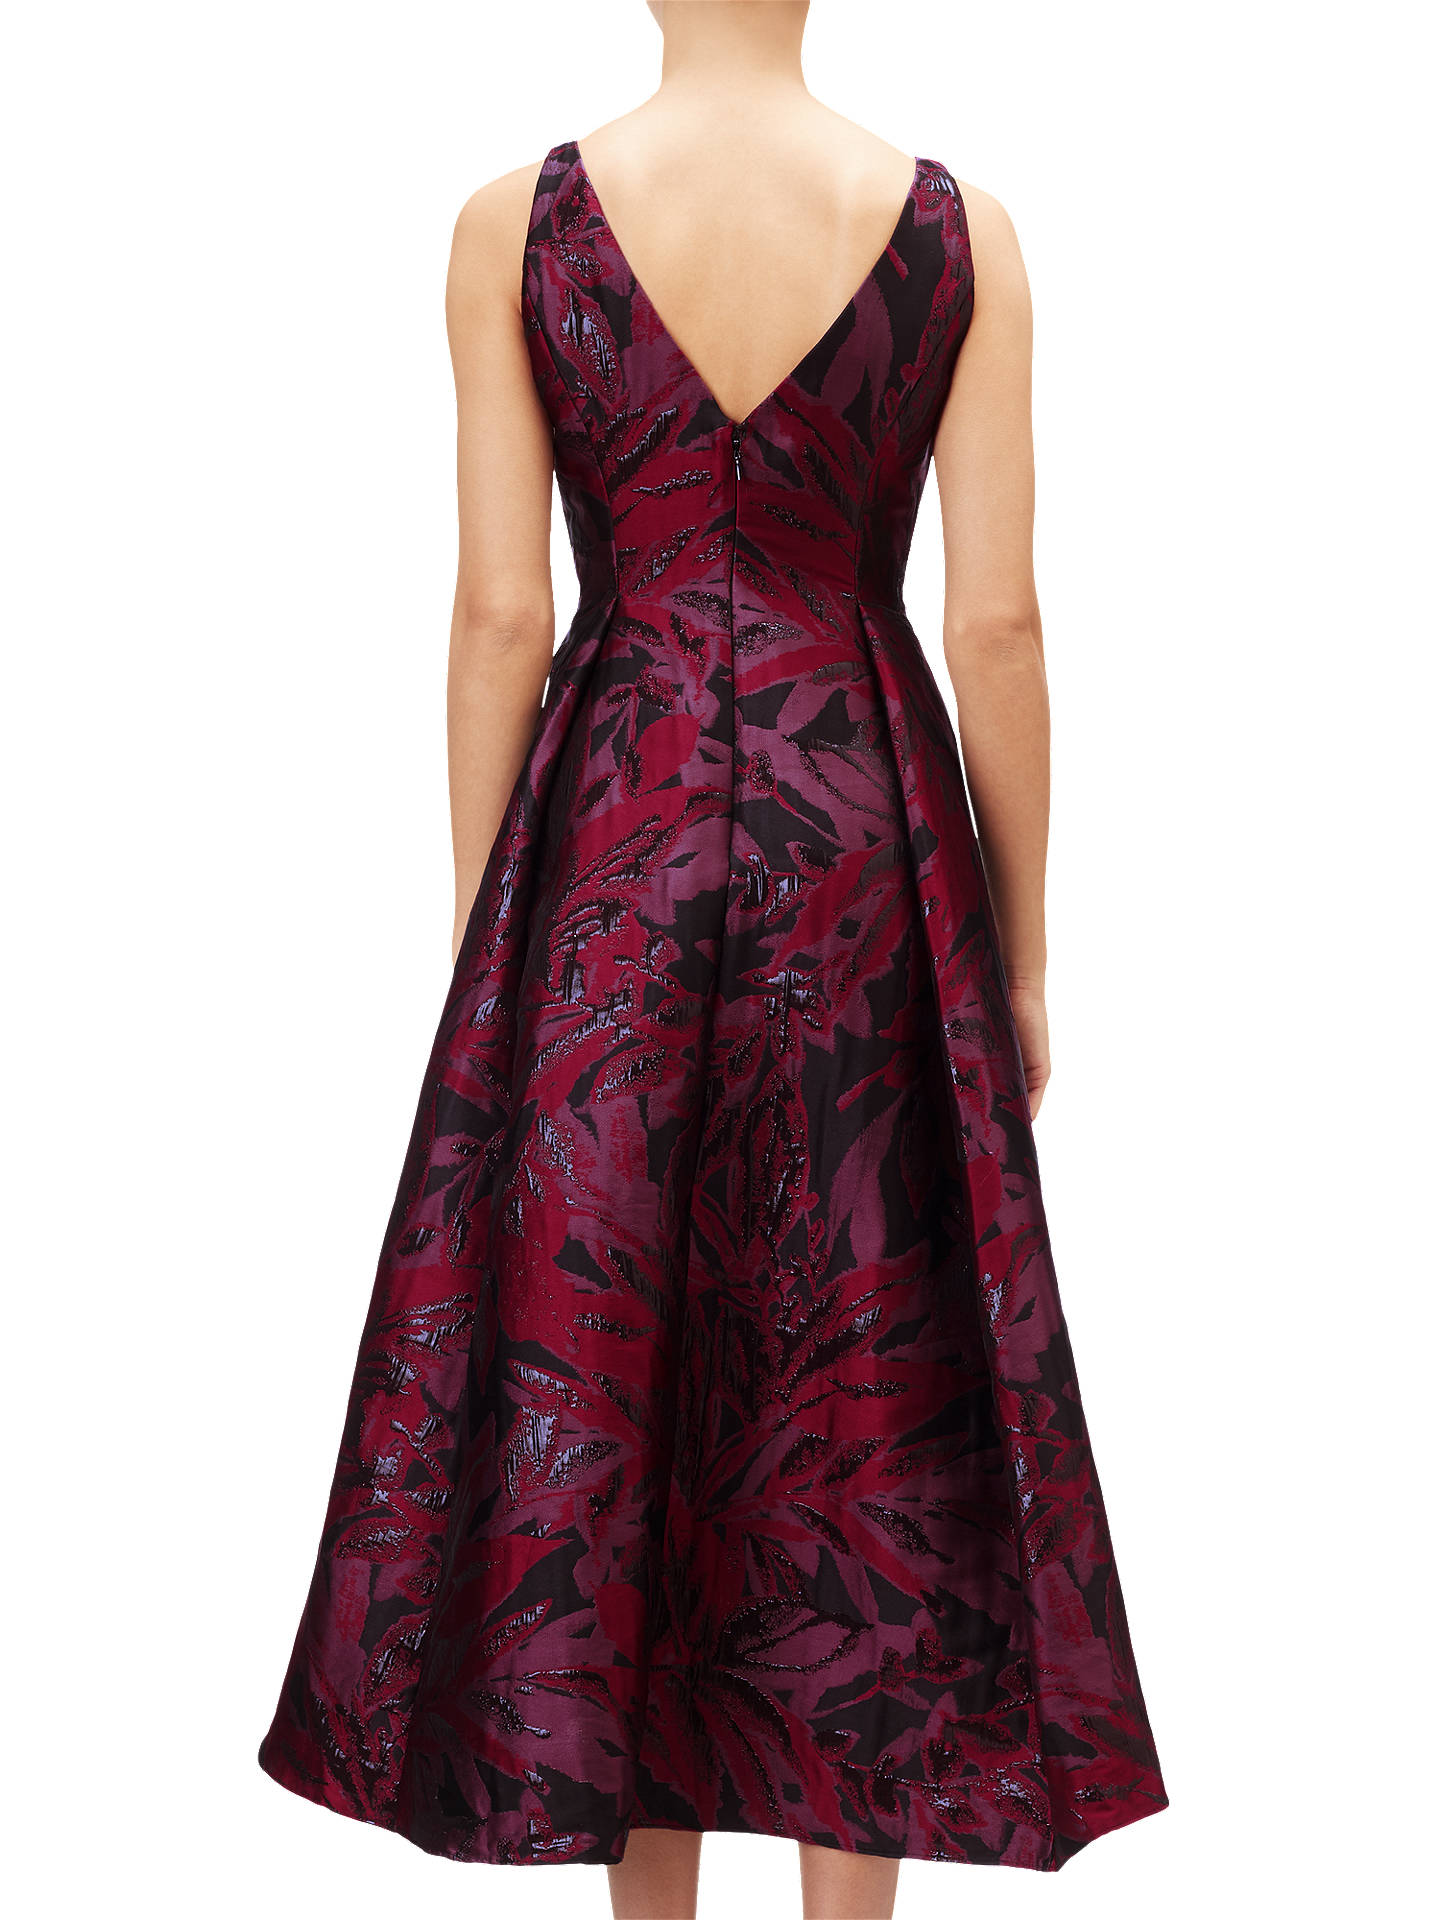 Adrianna Papell Floral Jacquard Embellished Dress, Wine Berry/Multi at ...